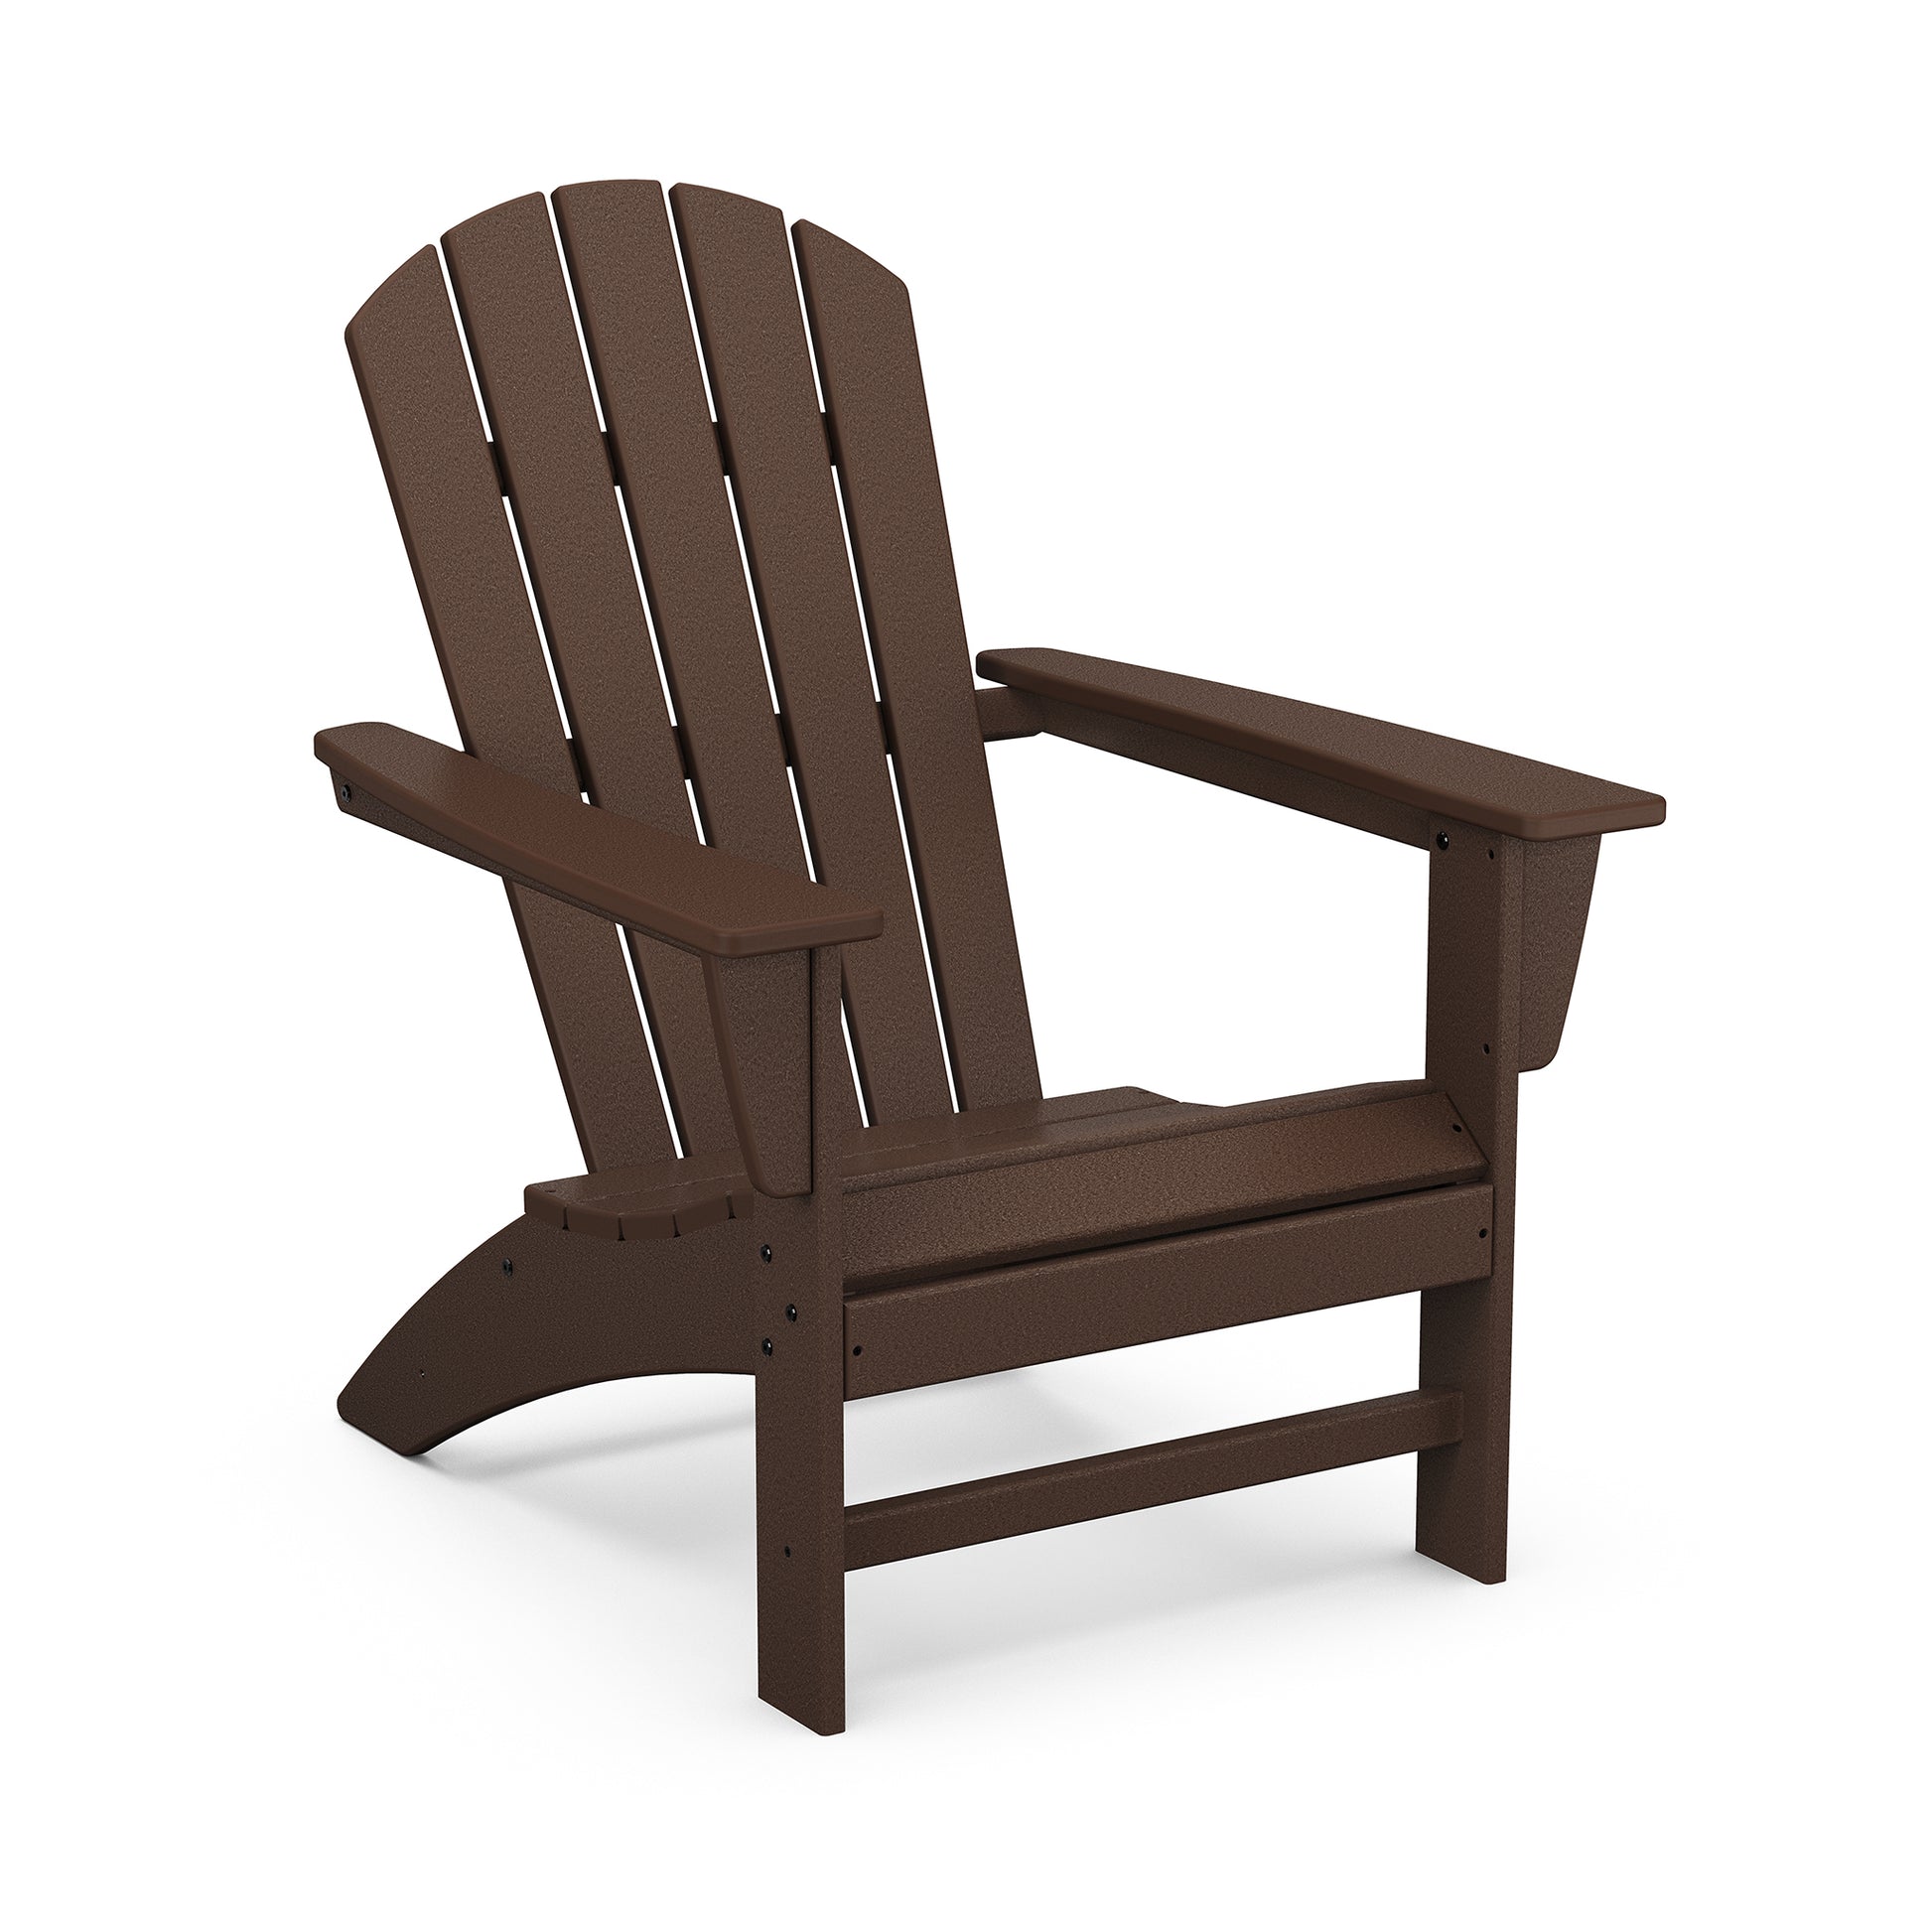 A brown, classic POLYWOOD Nautical Adirondack chair made of plastic, depicted on a plain white background, showcasing its high back and wide armrests.